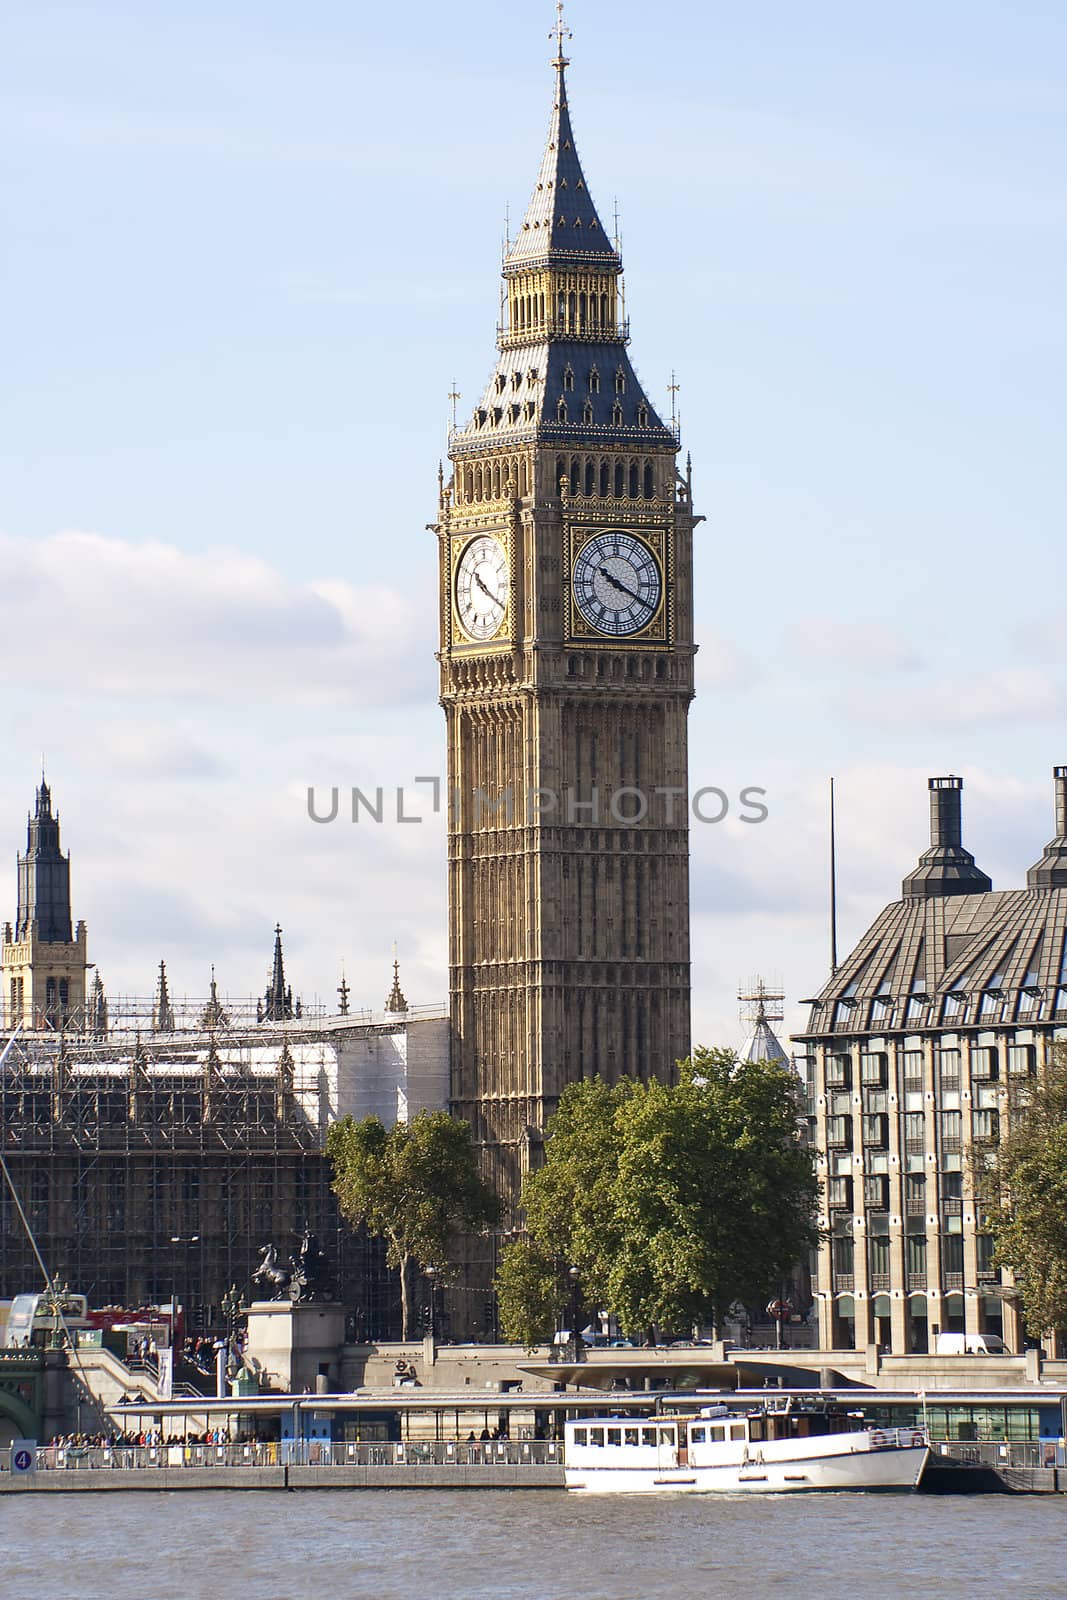 View of the Big Ben Tower in London